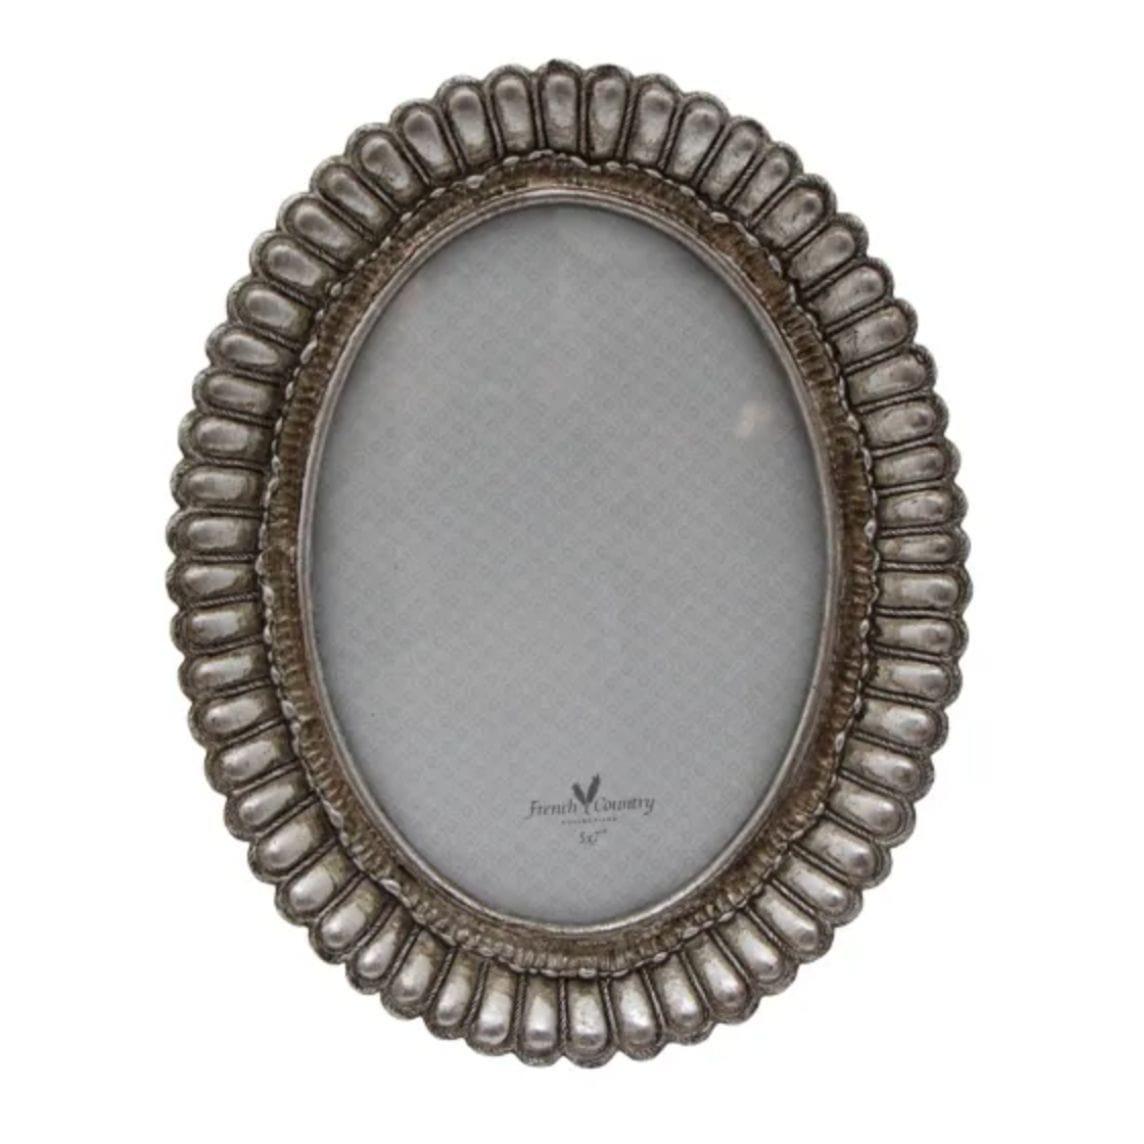 Fanned Oval Frame Pewter Finish 5x7" House of Dudley